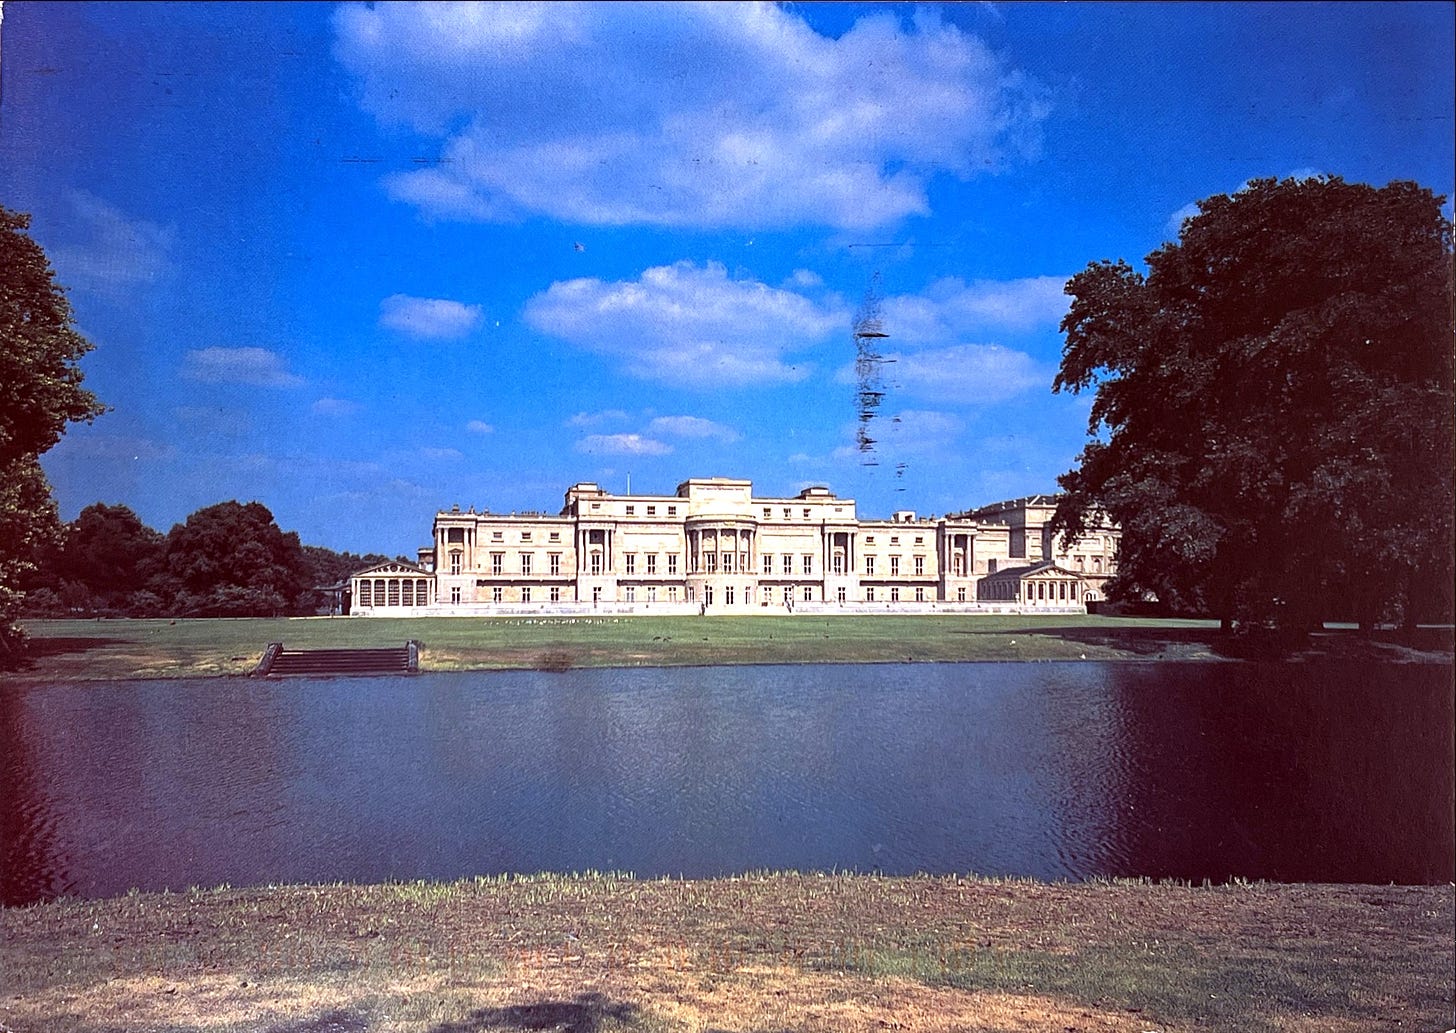 Photo of a large mansion or castle-like building overlooking a lake.